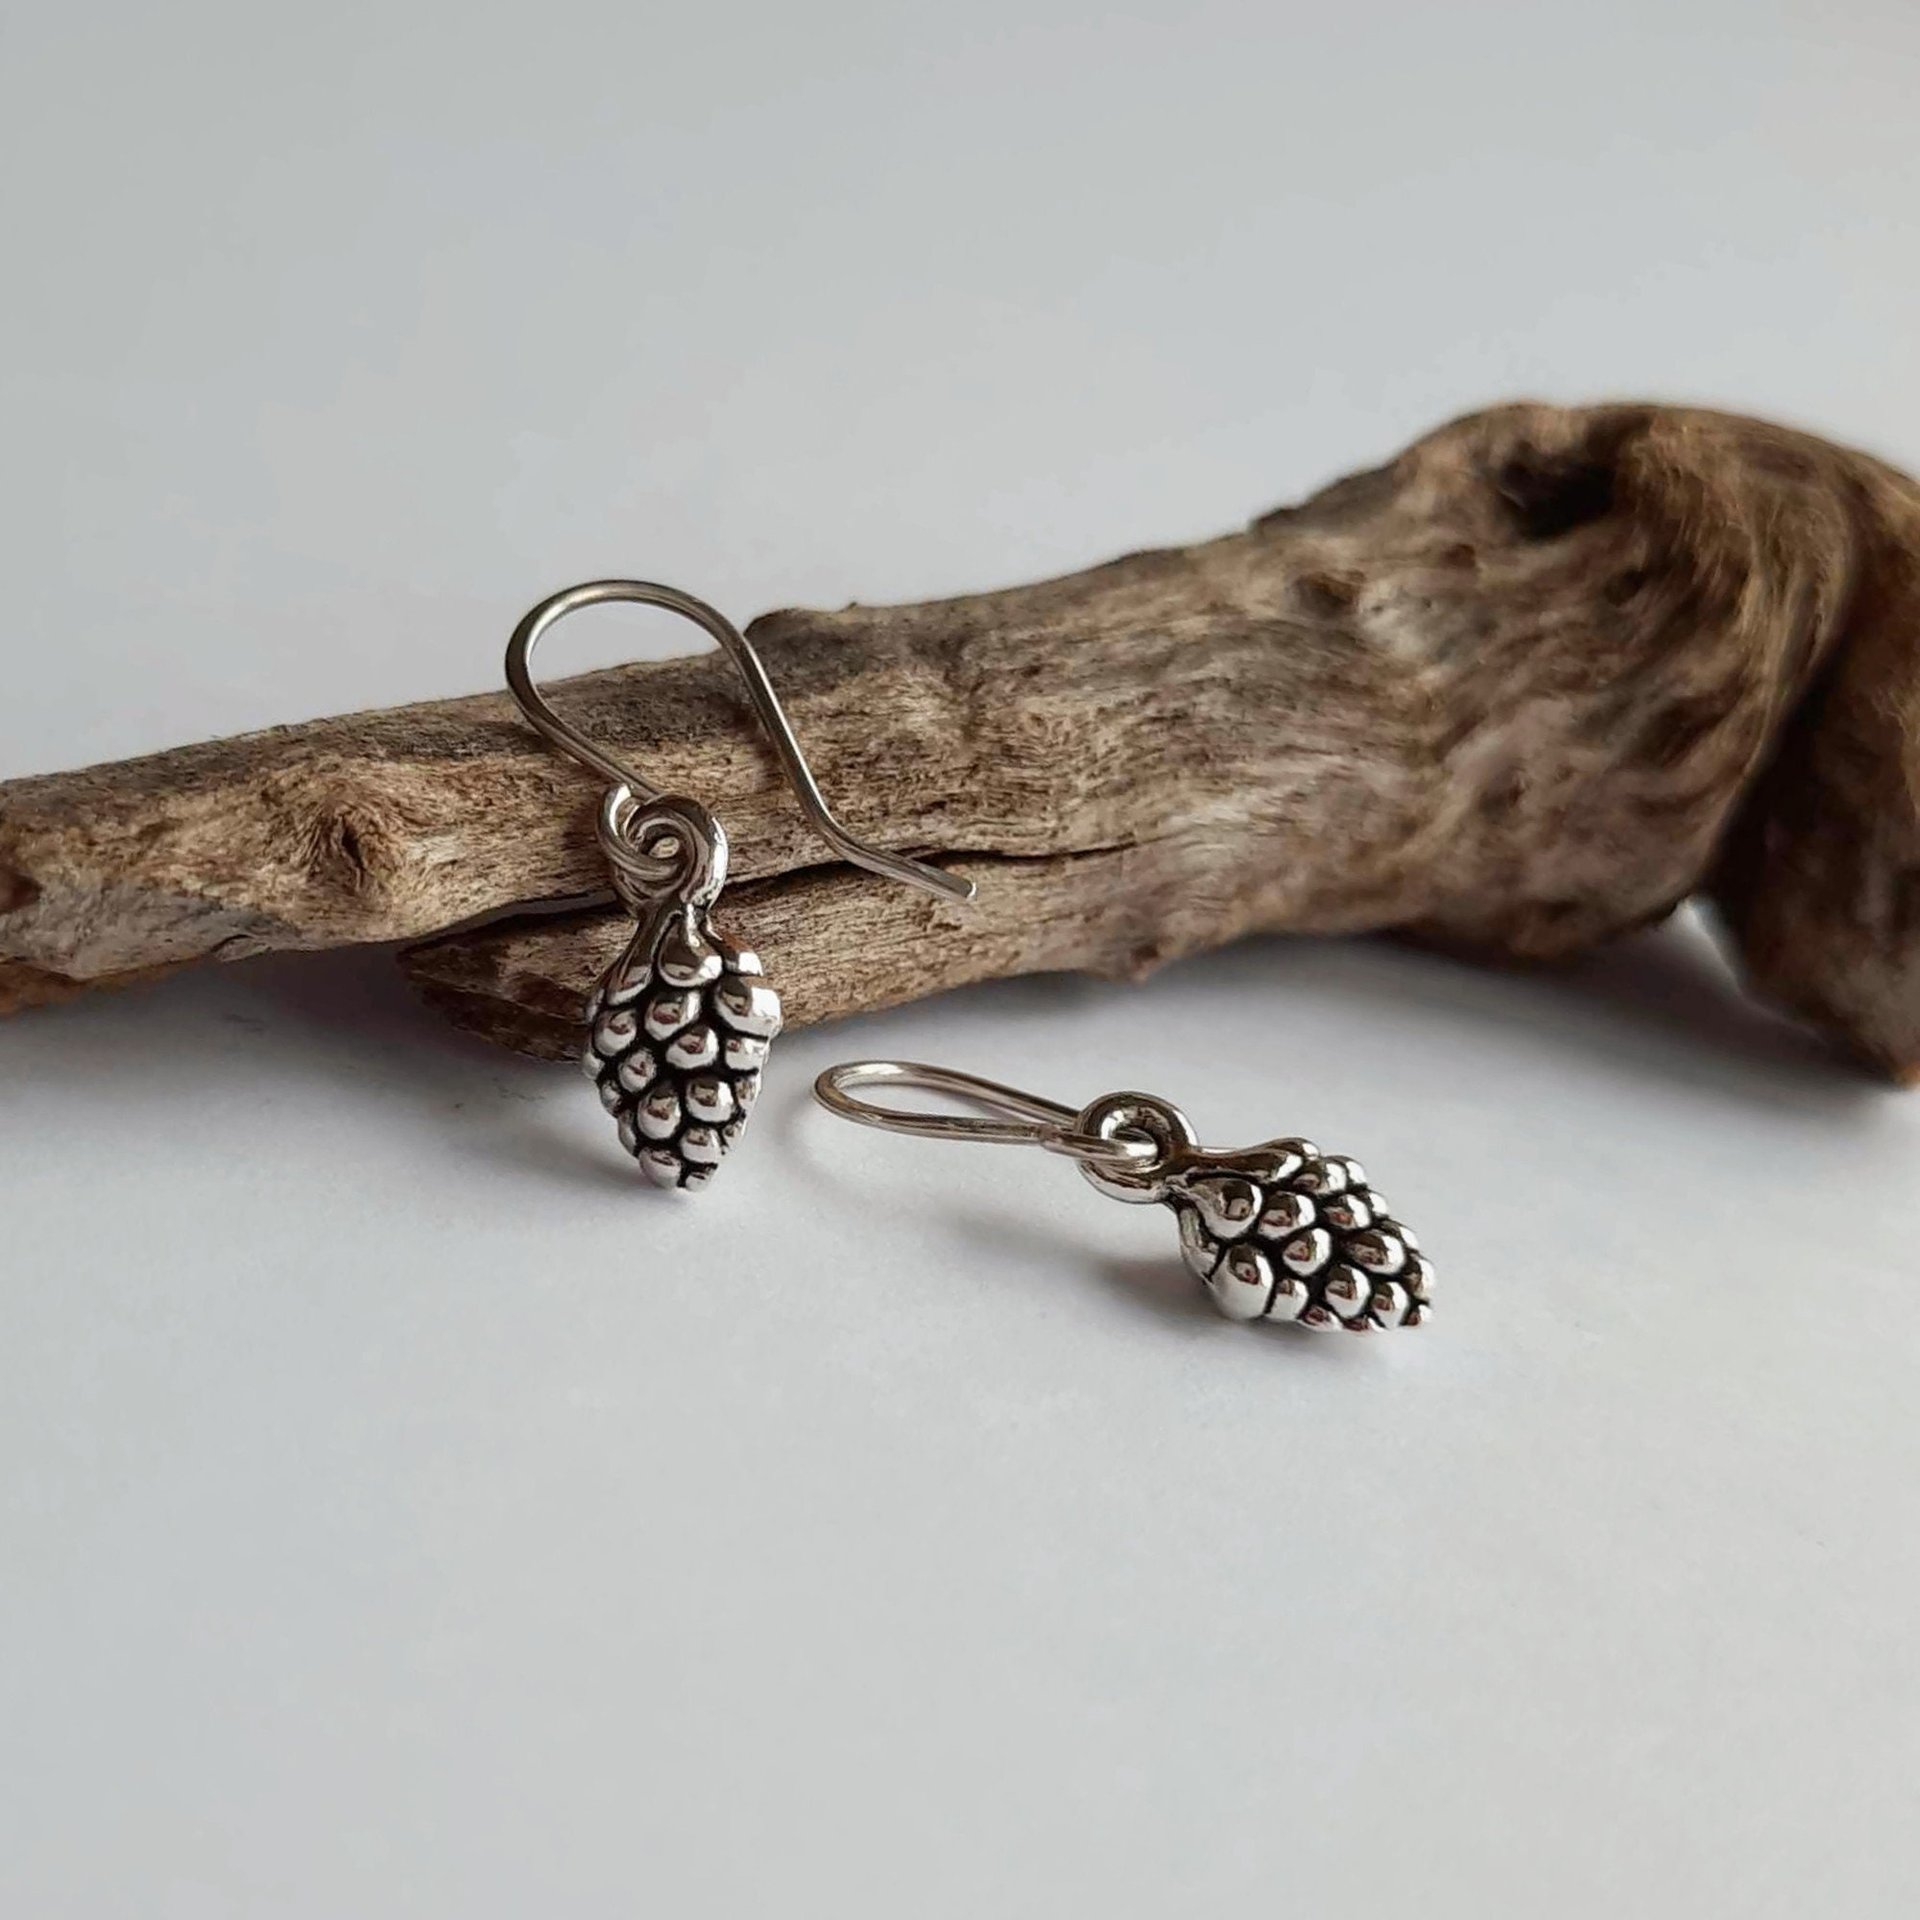 Silver pine cone drop earrings on handmade recycled 925 sterling silver ear wires by The Tiny Tree Frog Jewellery